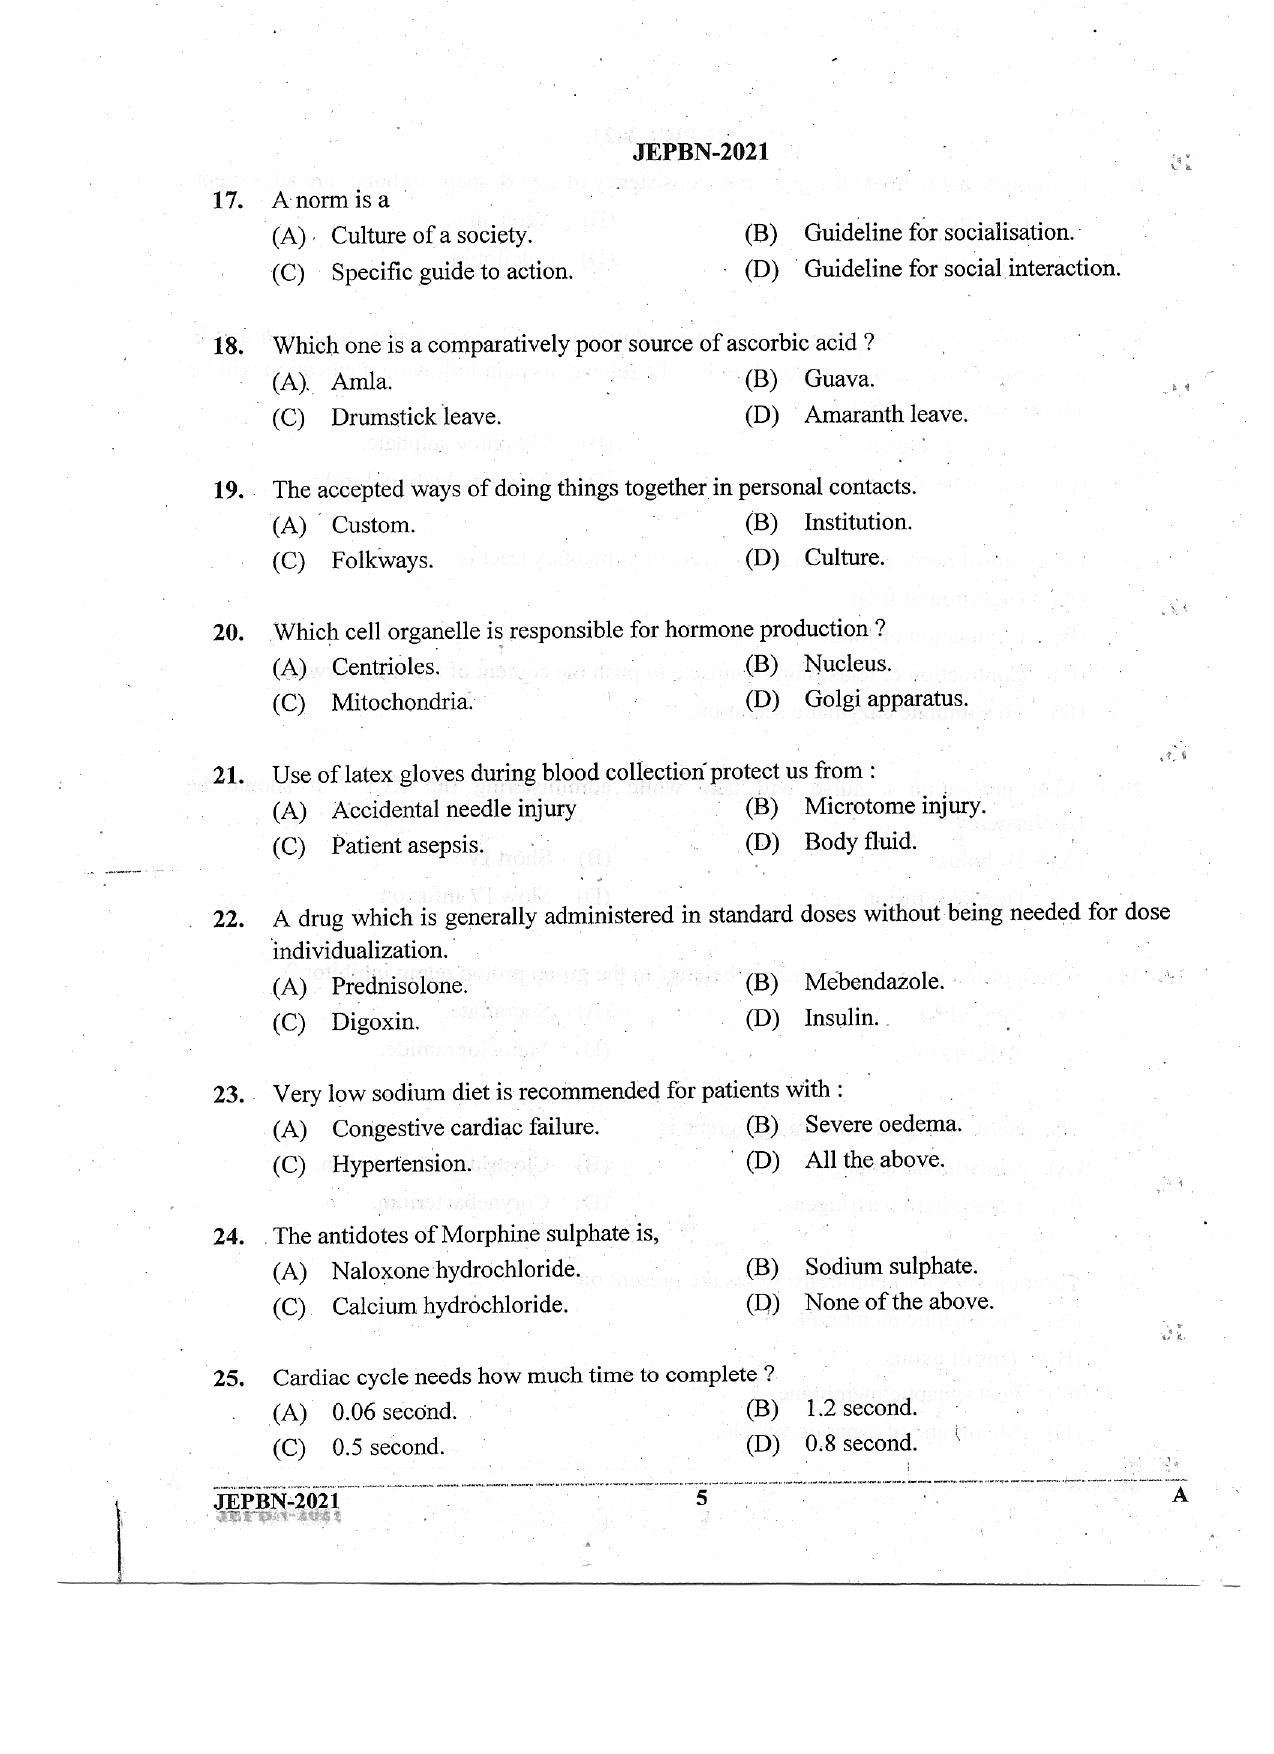 WBJEE JEPBN 2021 Question Paper - Page 5